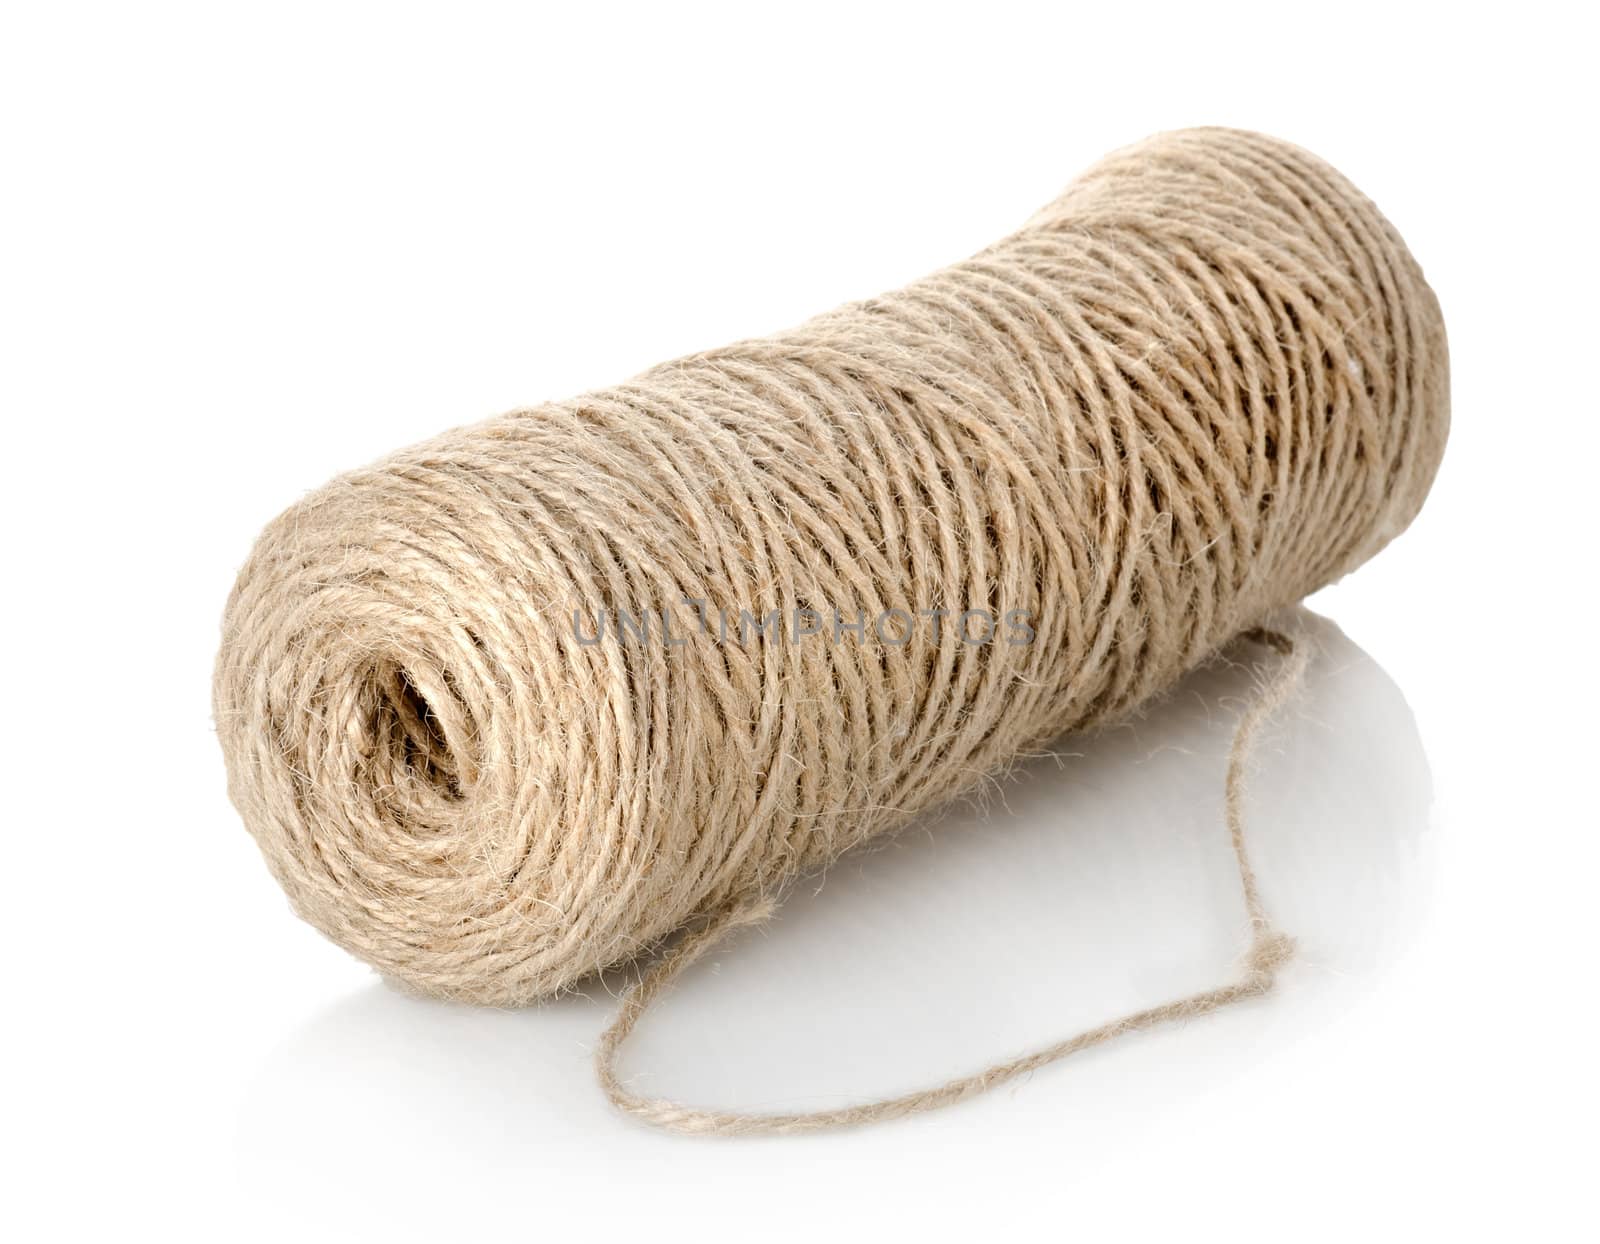 Grey rope isolated on a white background